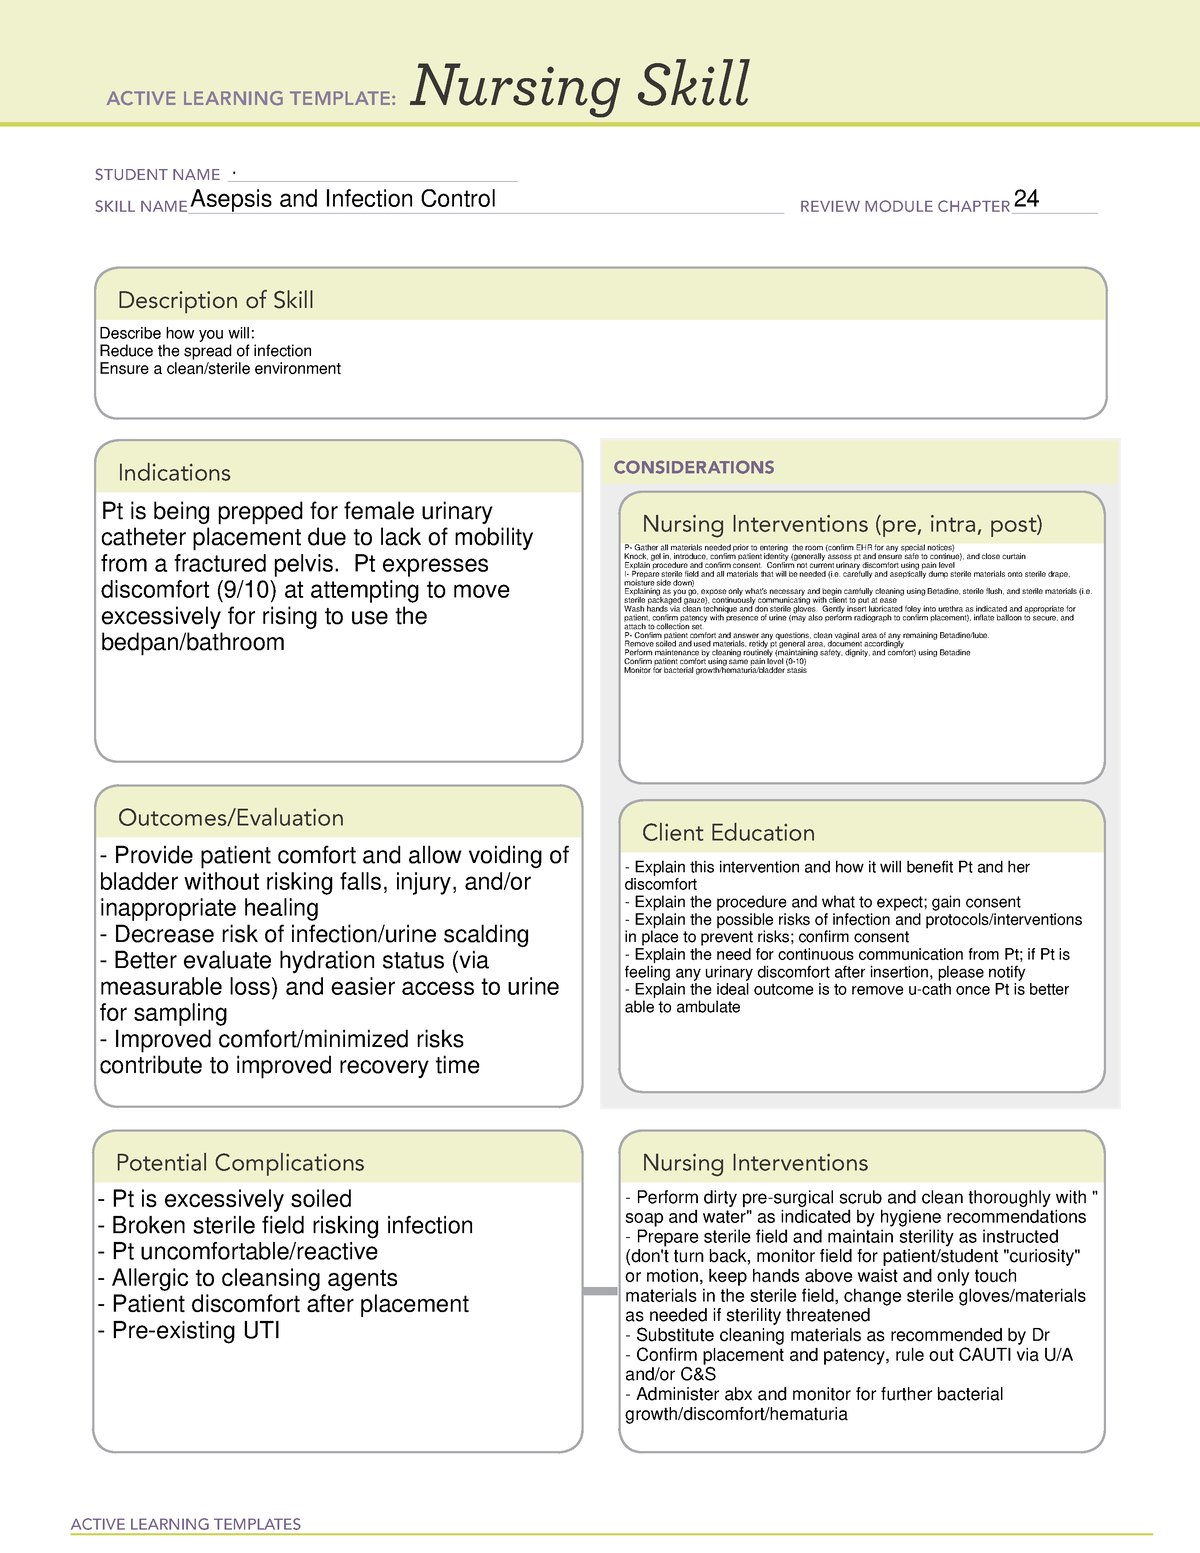 ati-asepsis-done-assignment-active-learning-templates-nursing-skill-student-name-studocu